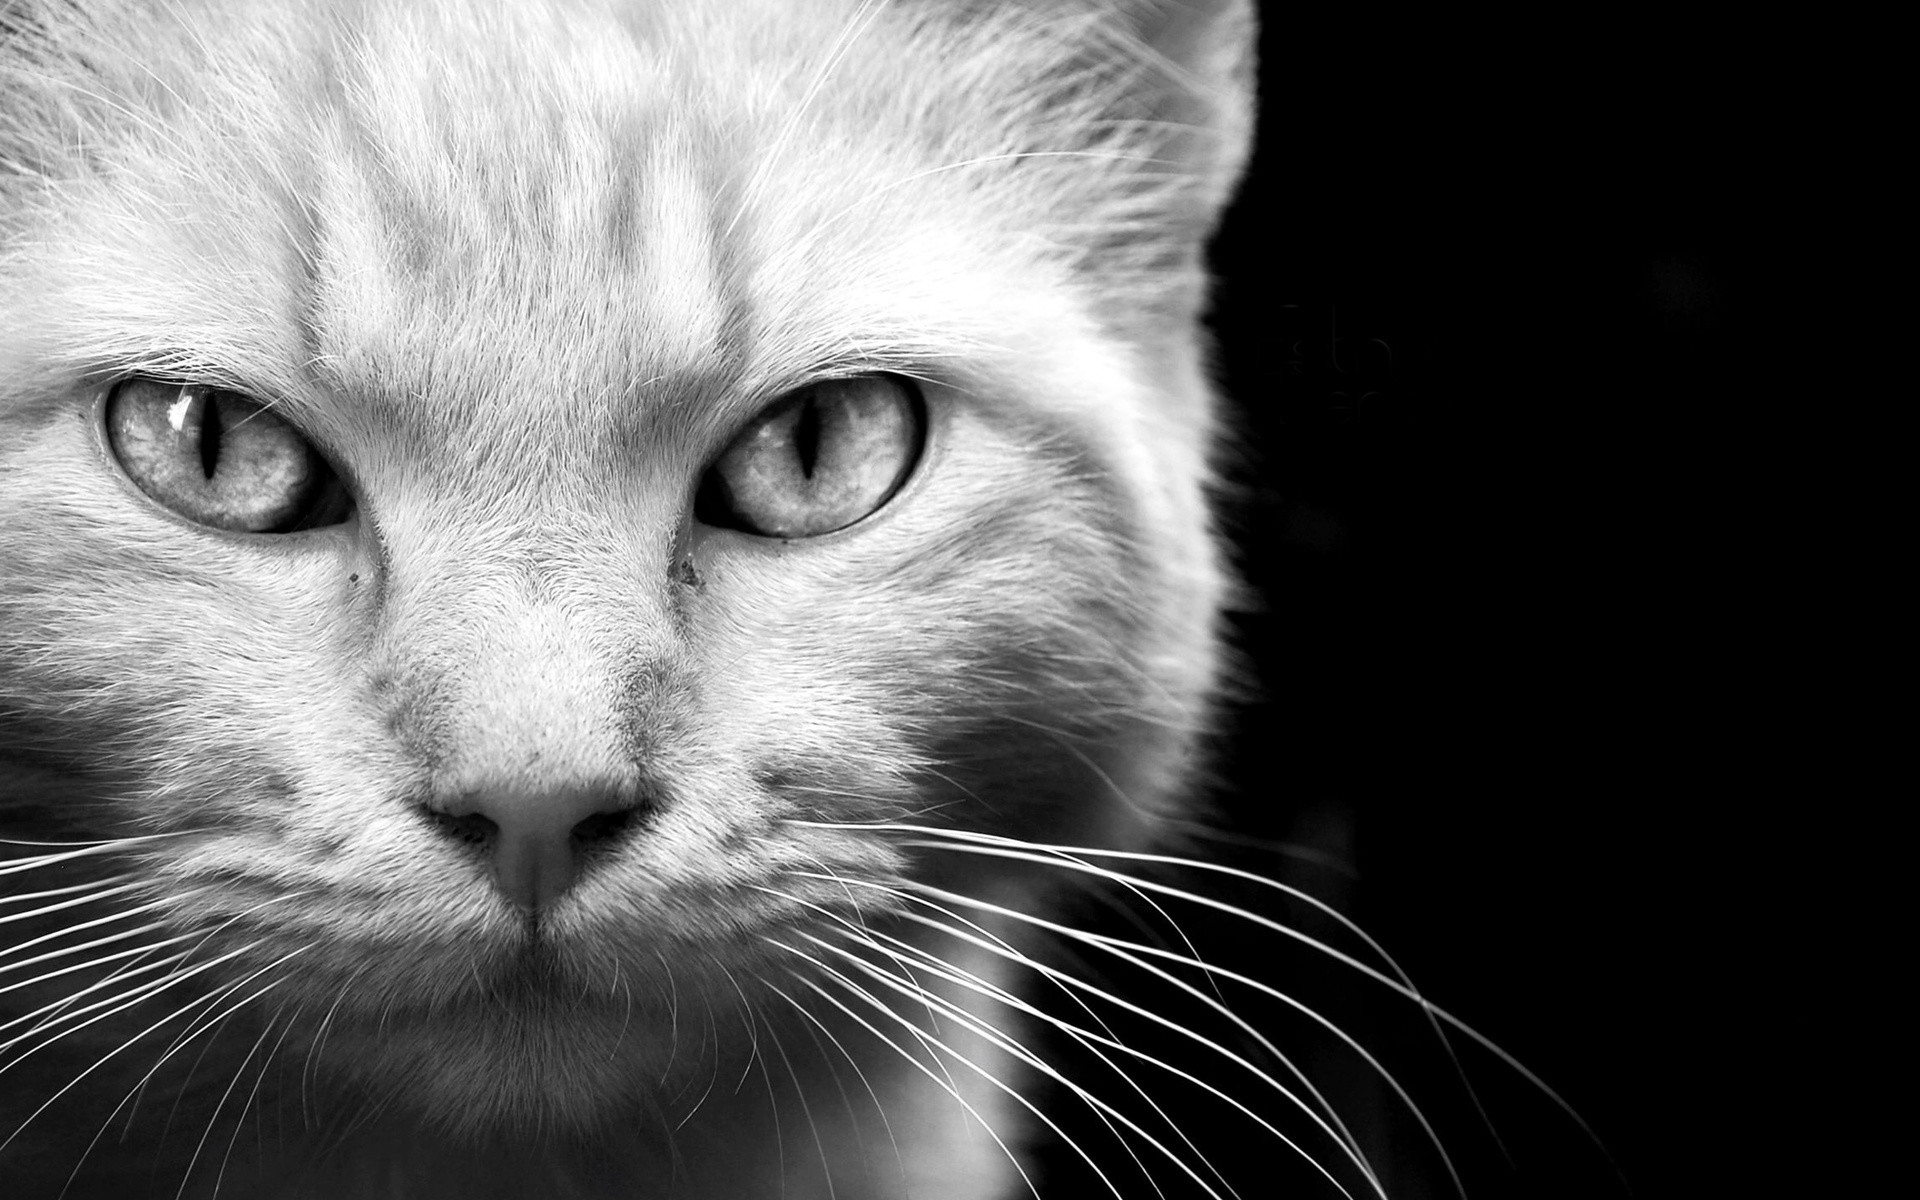 1920x1200 Animals cats felines face eyes whiskers fur black white monochrome wallpaper  |  | 25891 | WallpaperUP